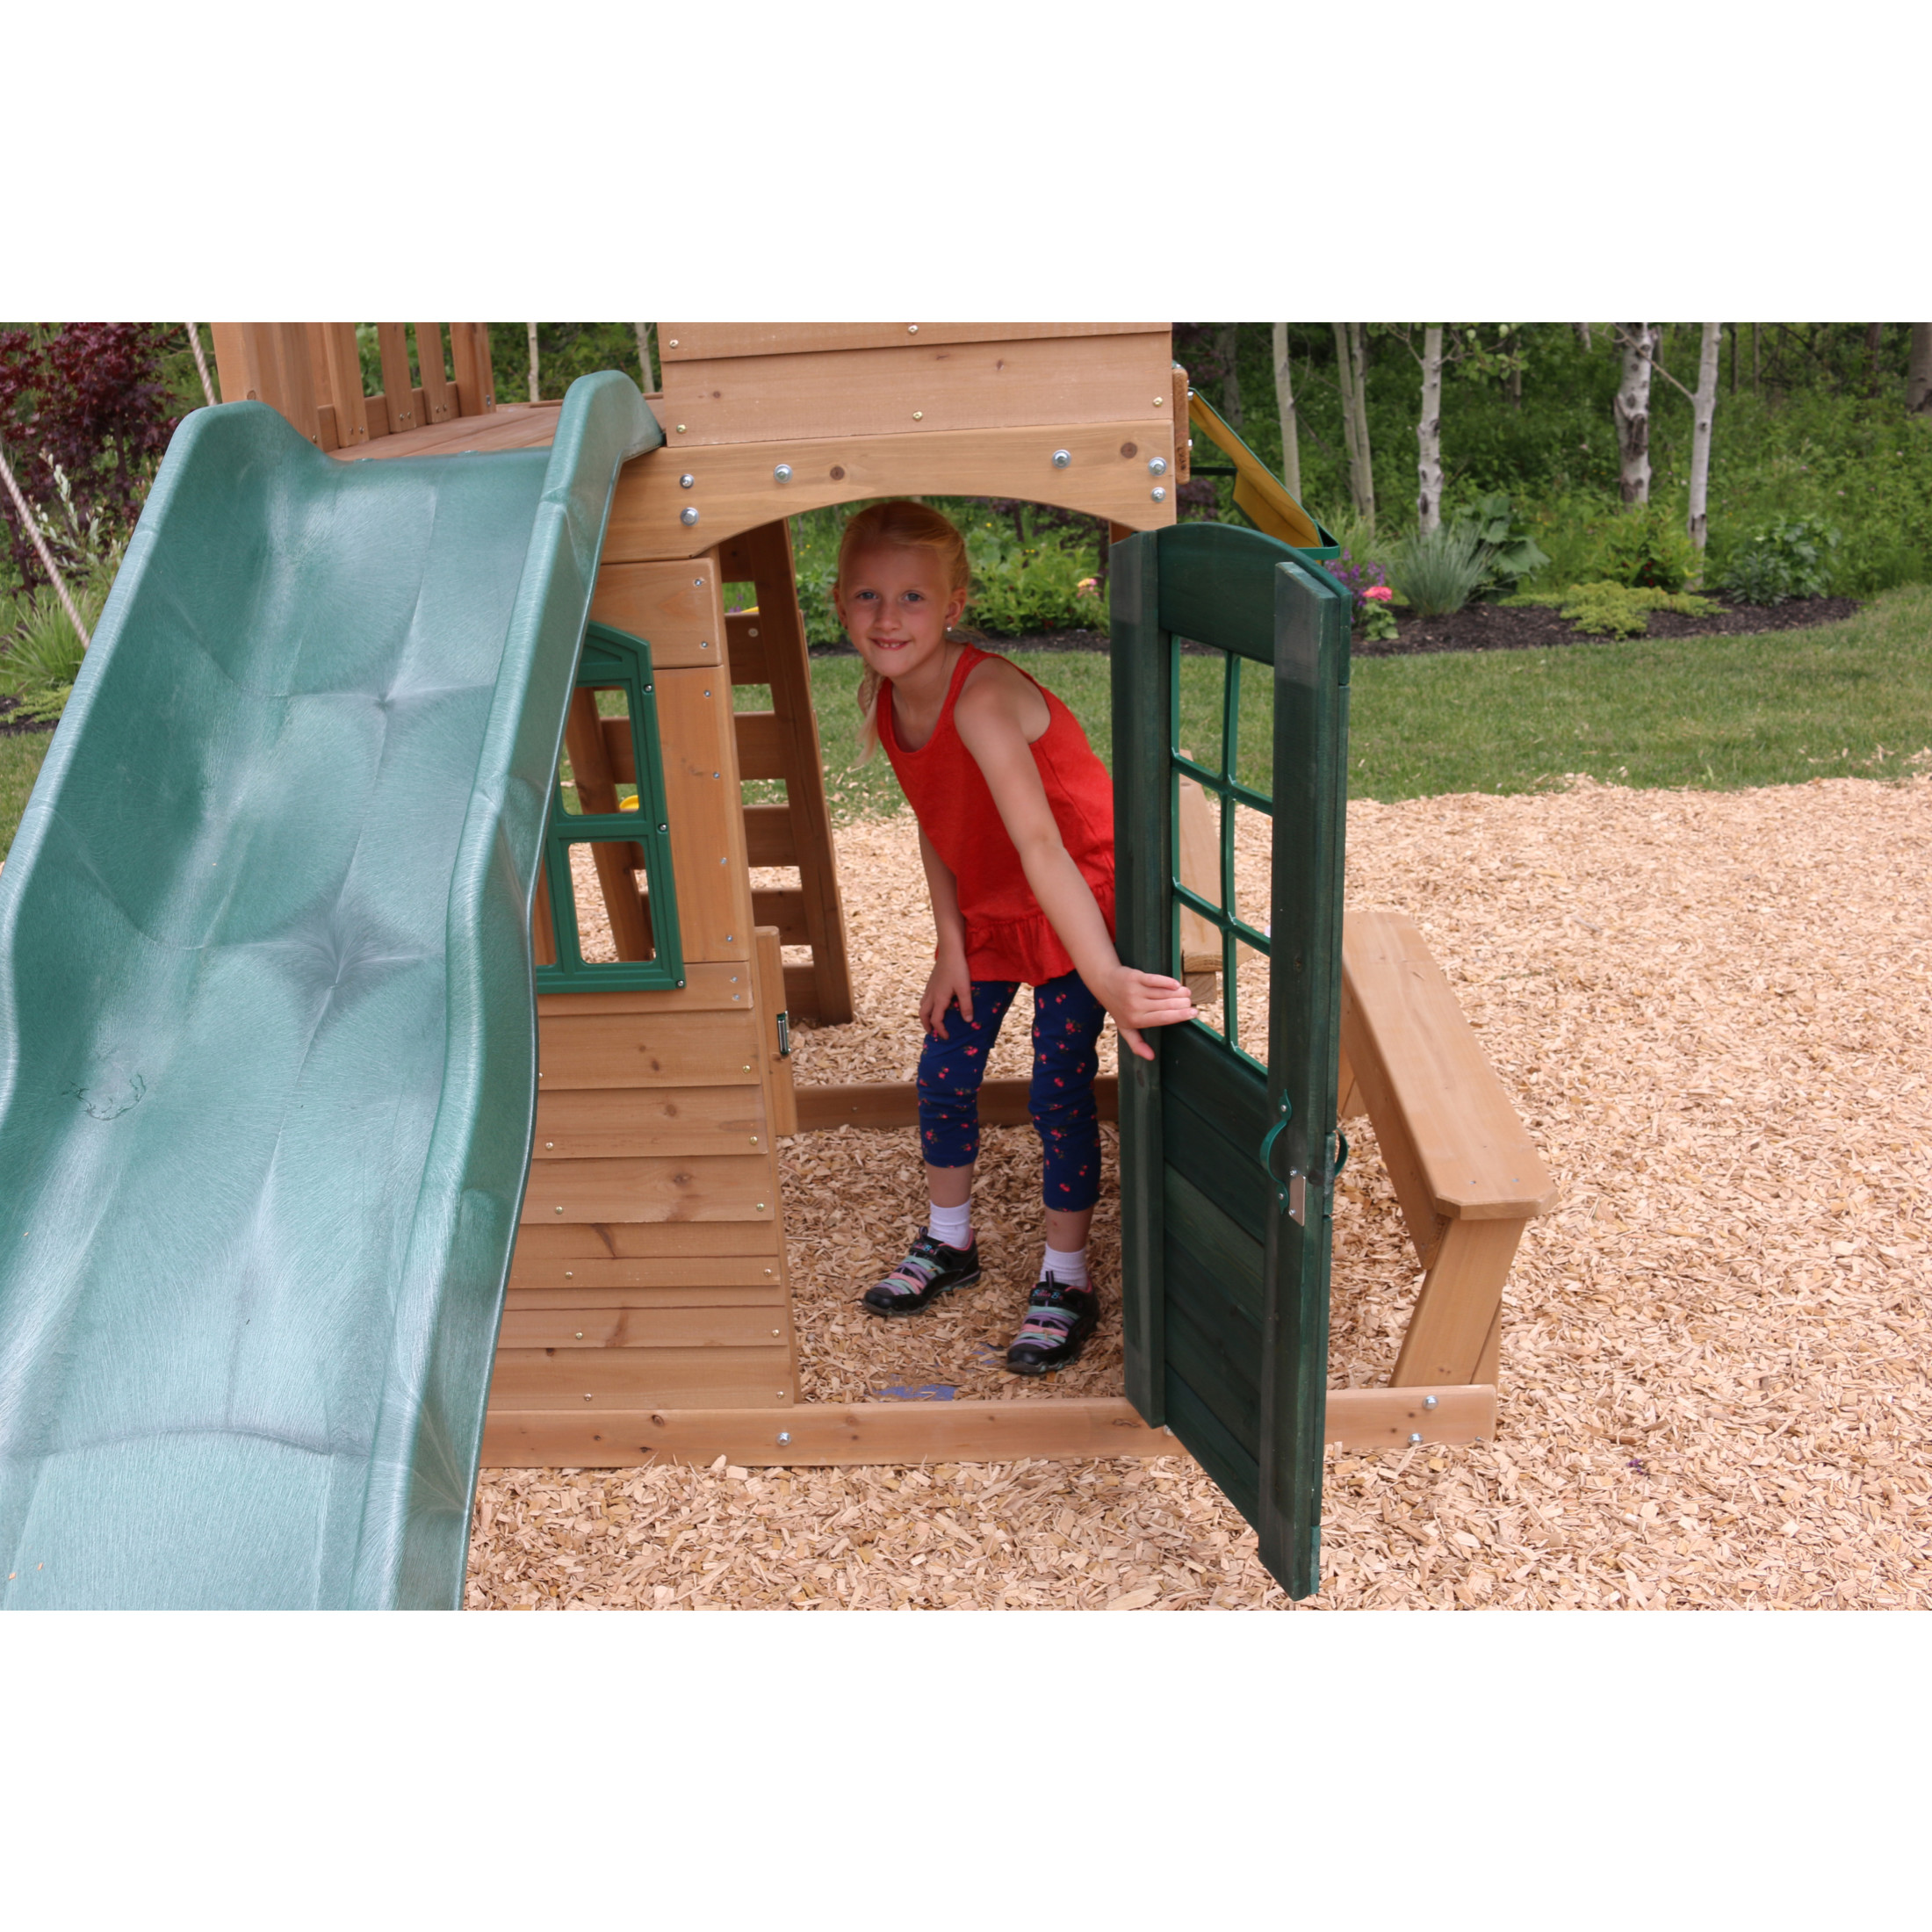 KidKraft Windale Wooden Swing Set / Playset with Clubhouse, Swings, Slide, Shaded Table and Bench - image 8 of 12